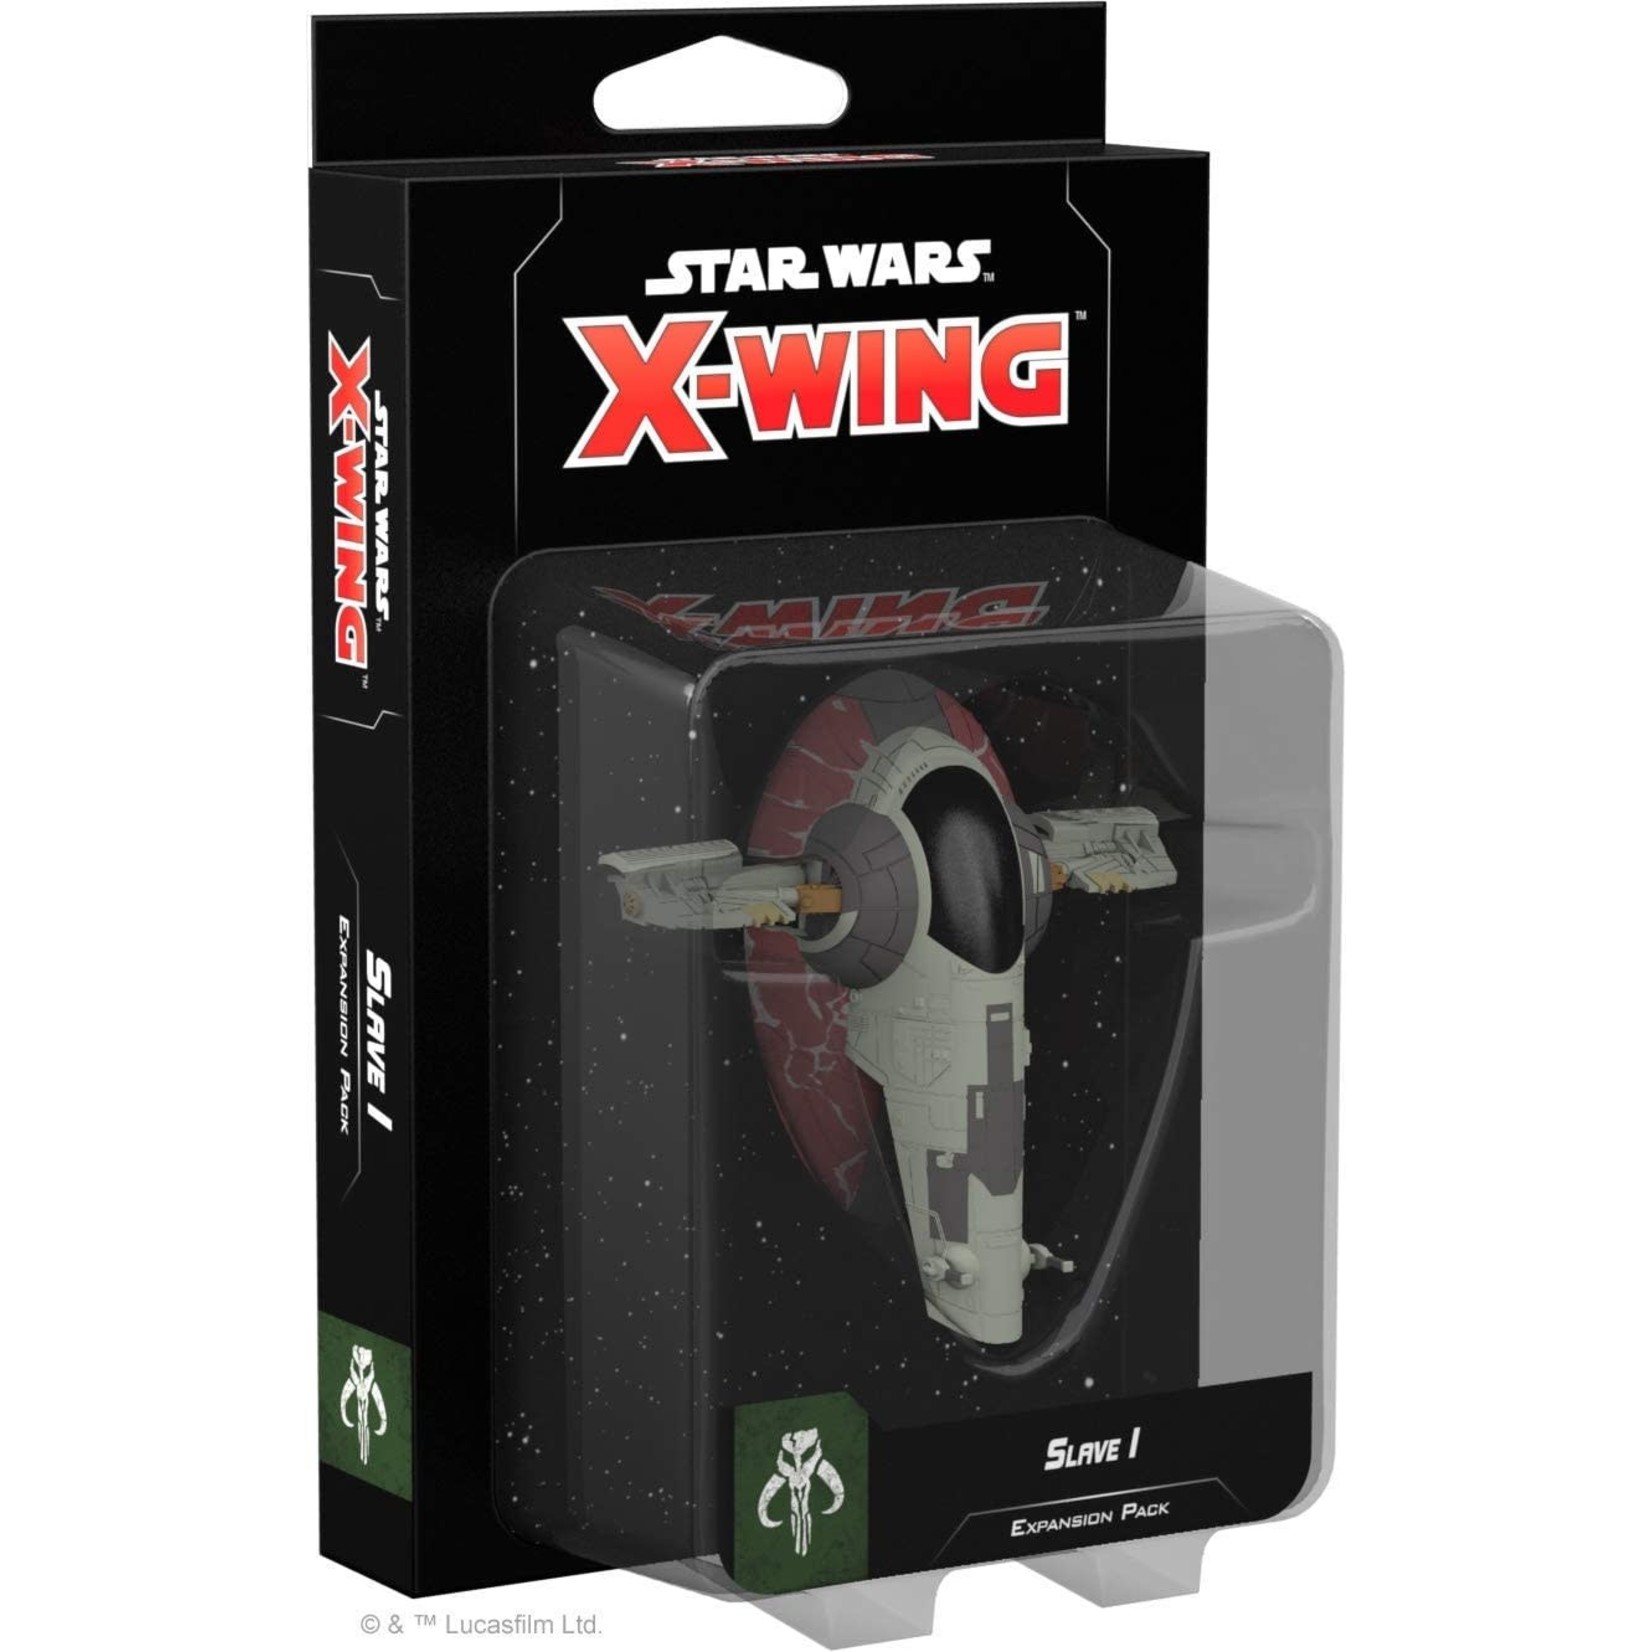 Star Wars X-Wing 2e: Slave 1 Expansion